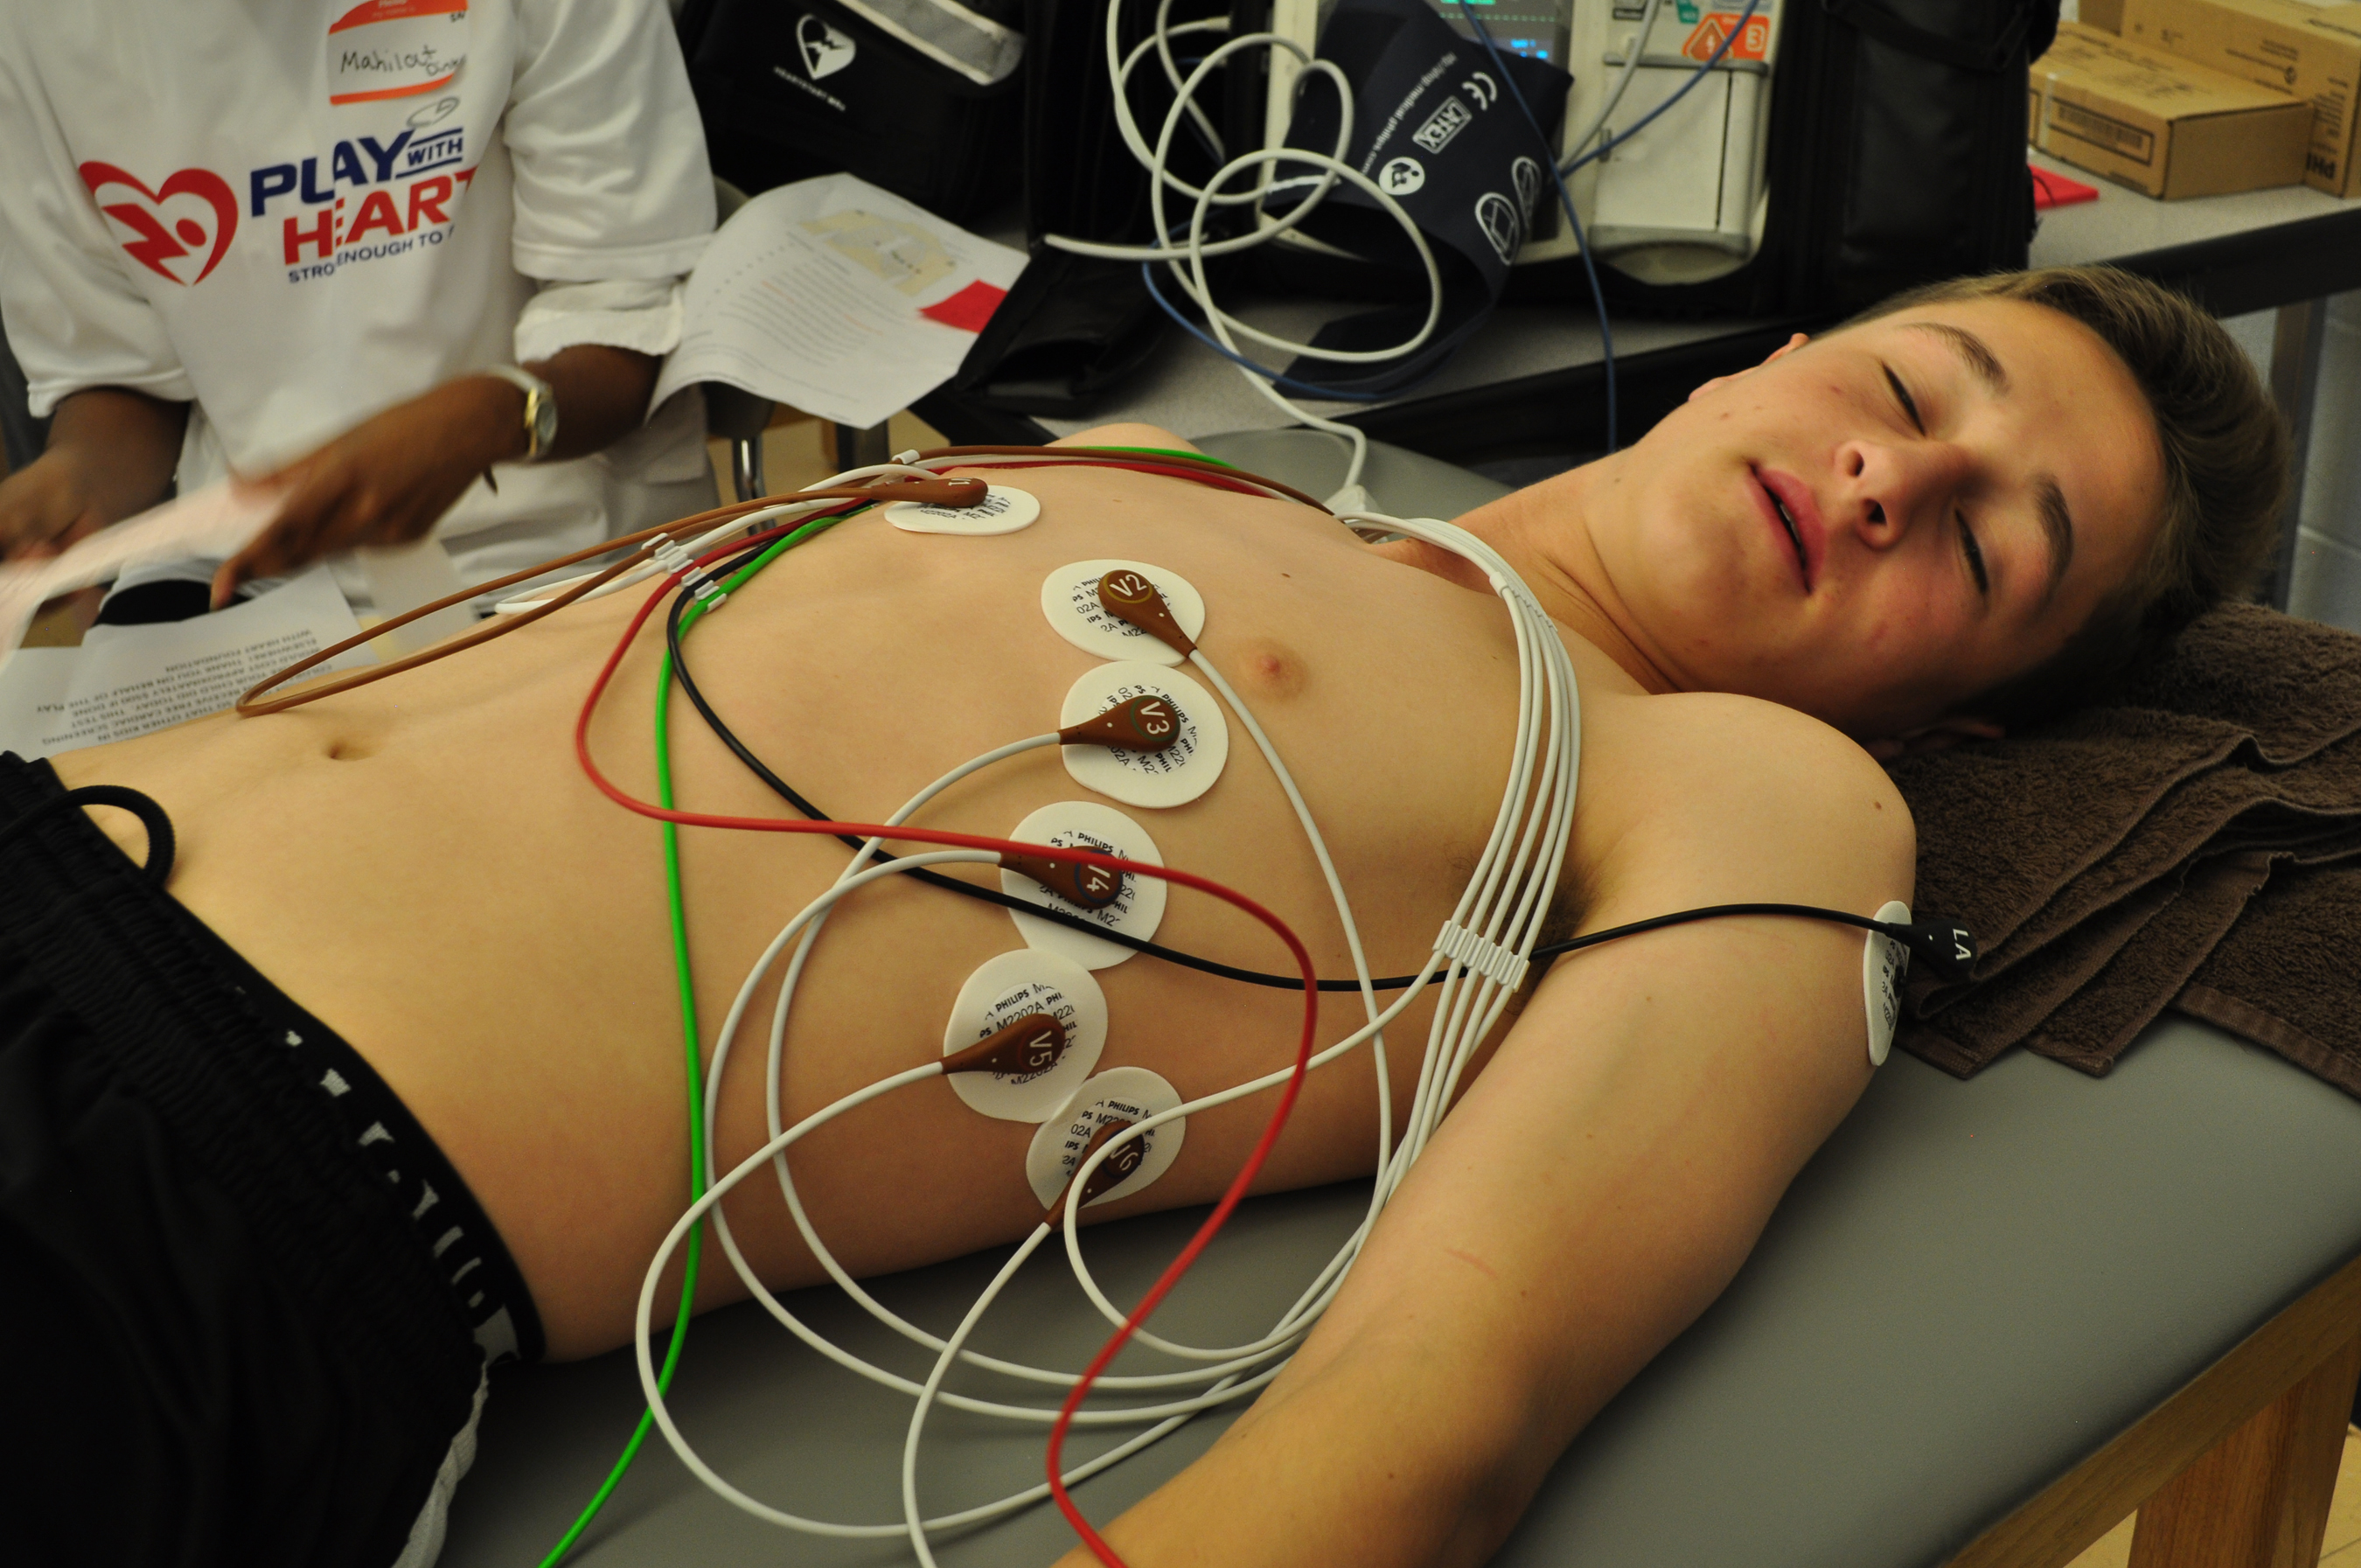 Cardiac arrest study in young athletes raises heart screening questions